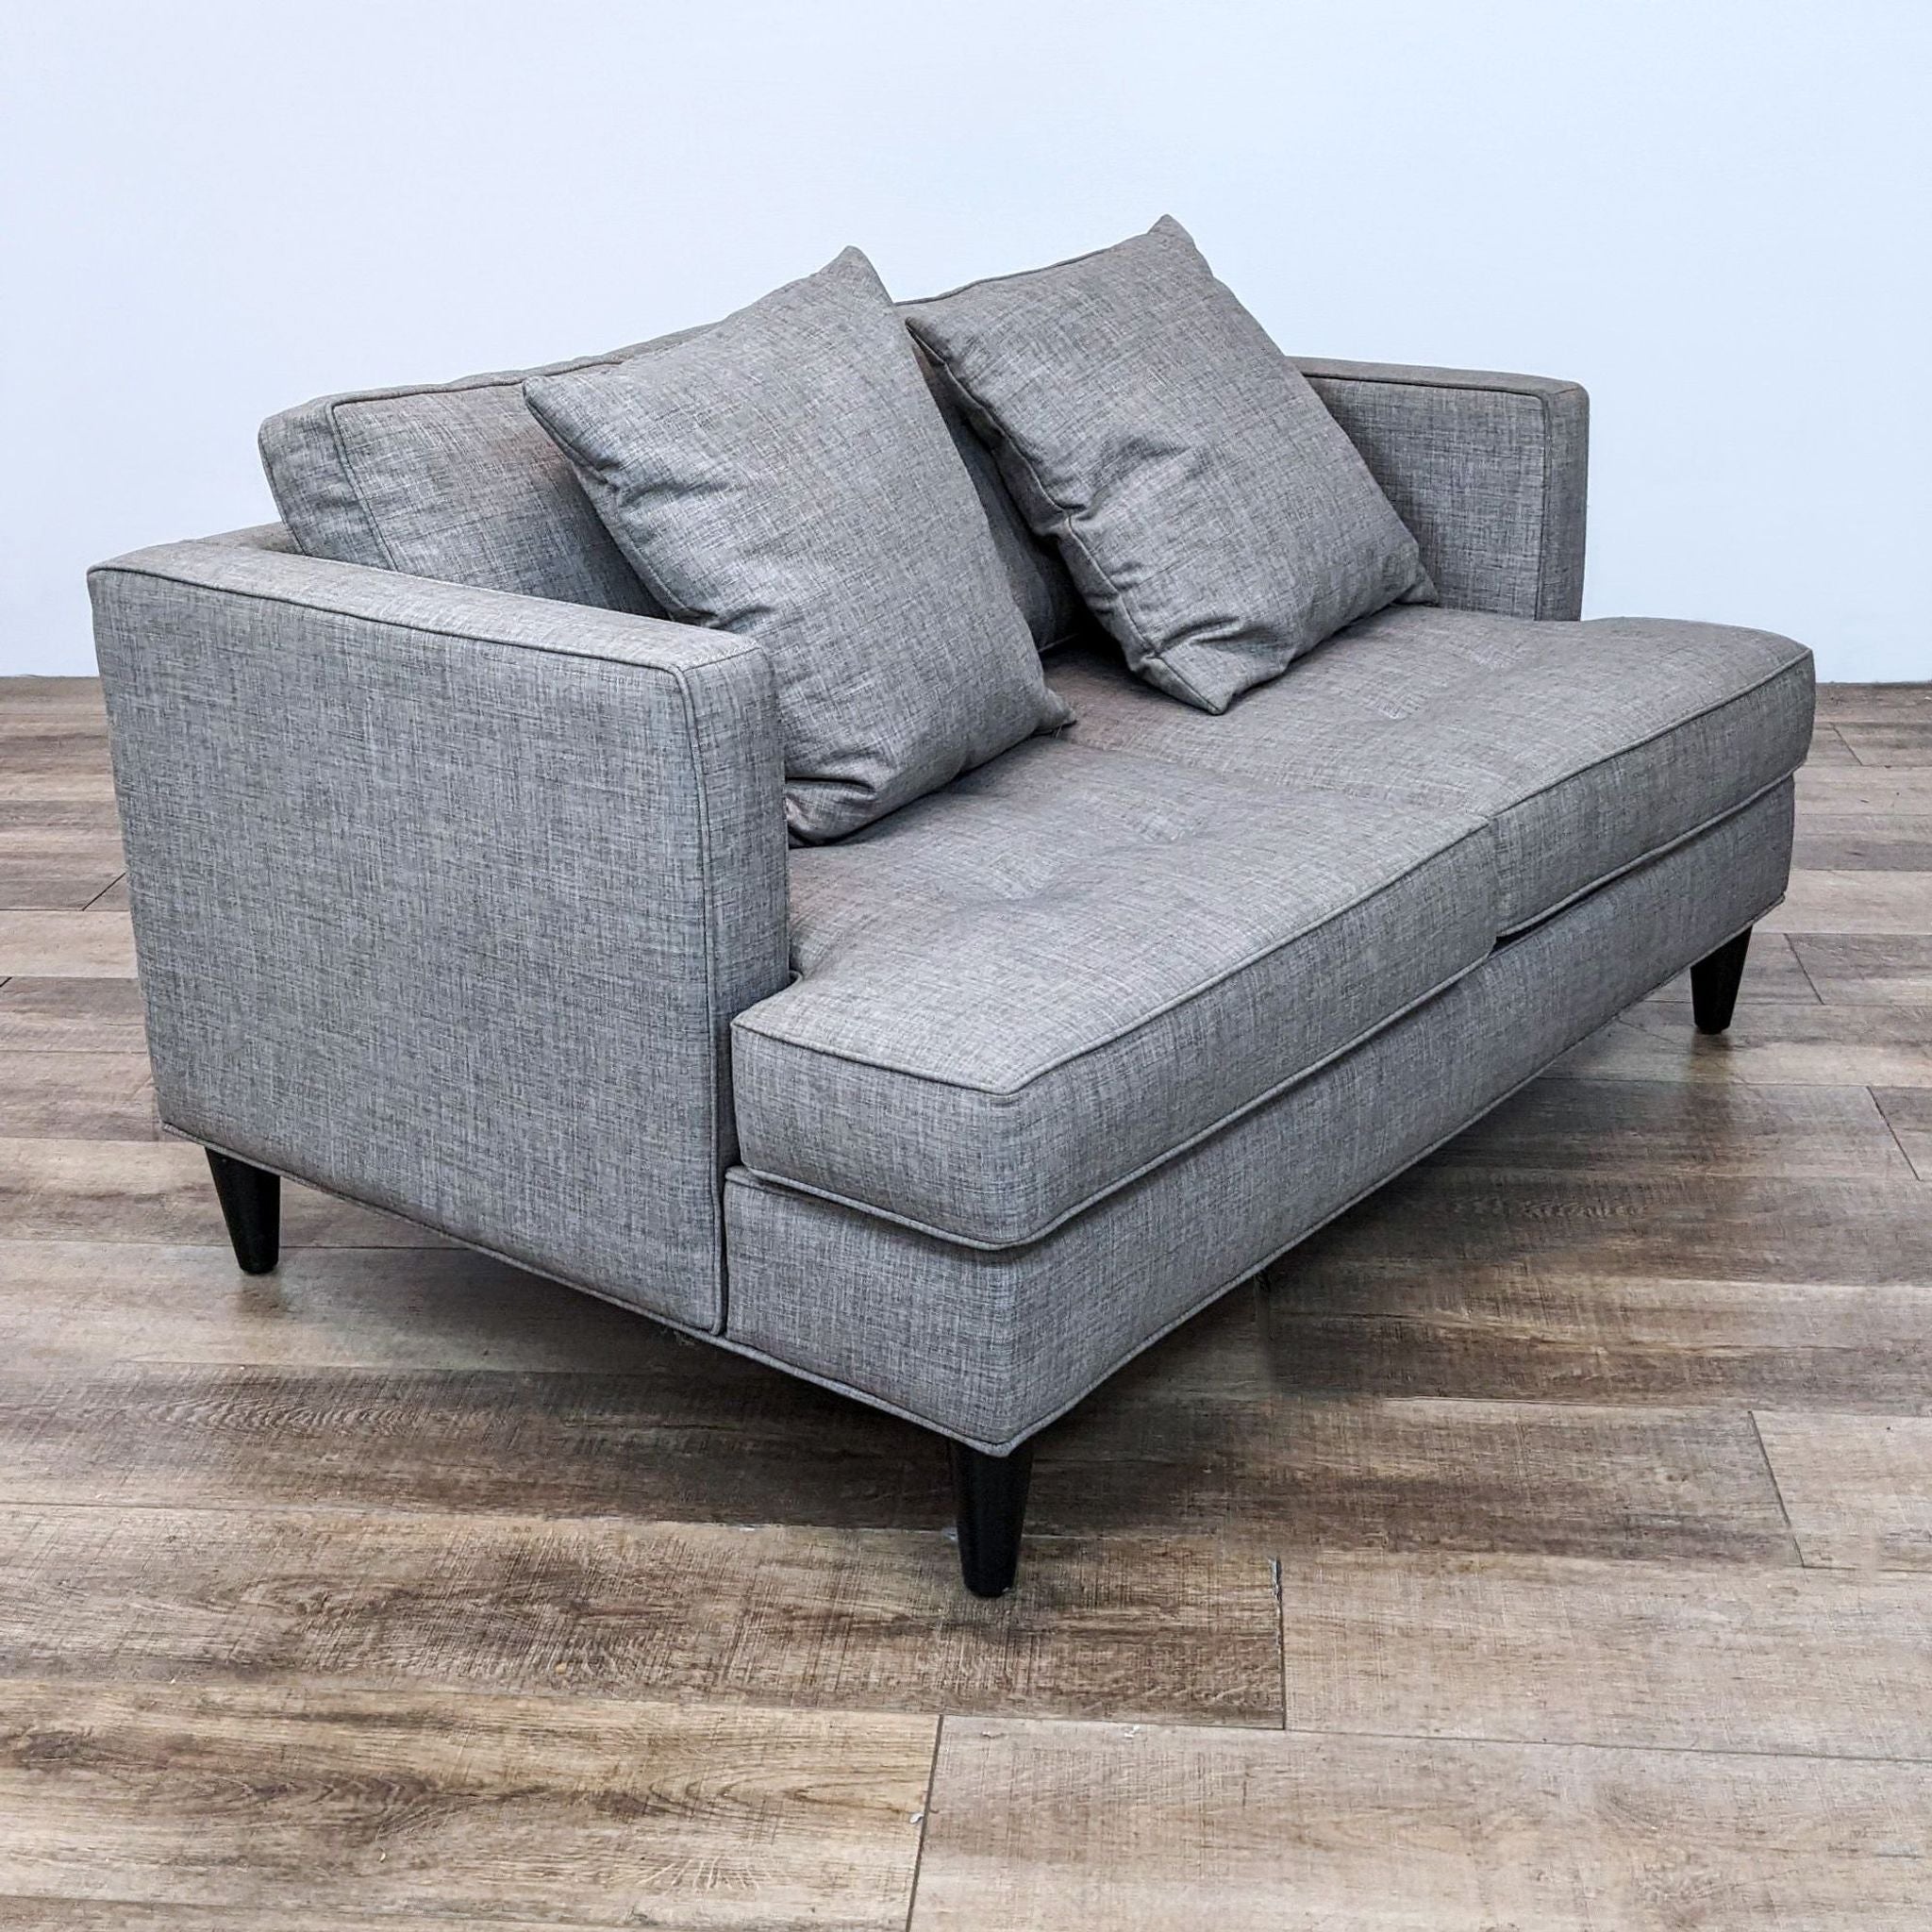 Grey fabric bench seat loveseat by Reperch with narrow arms, tufted design, and dark legs.